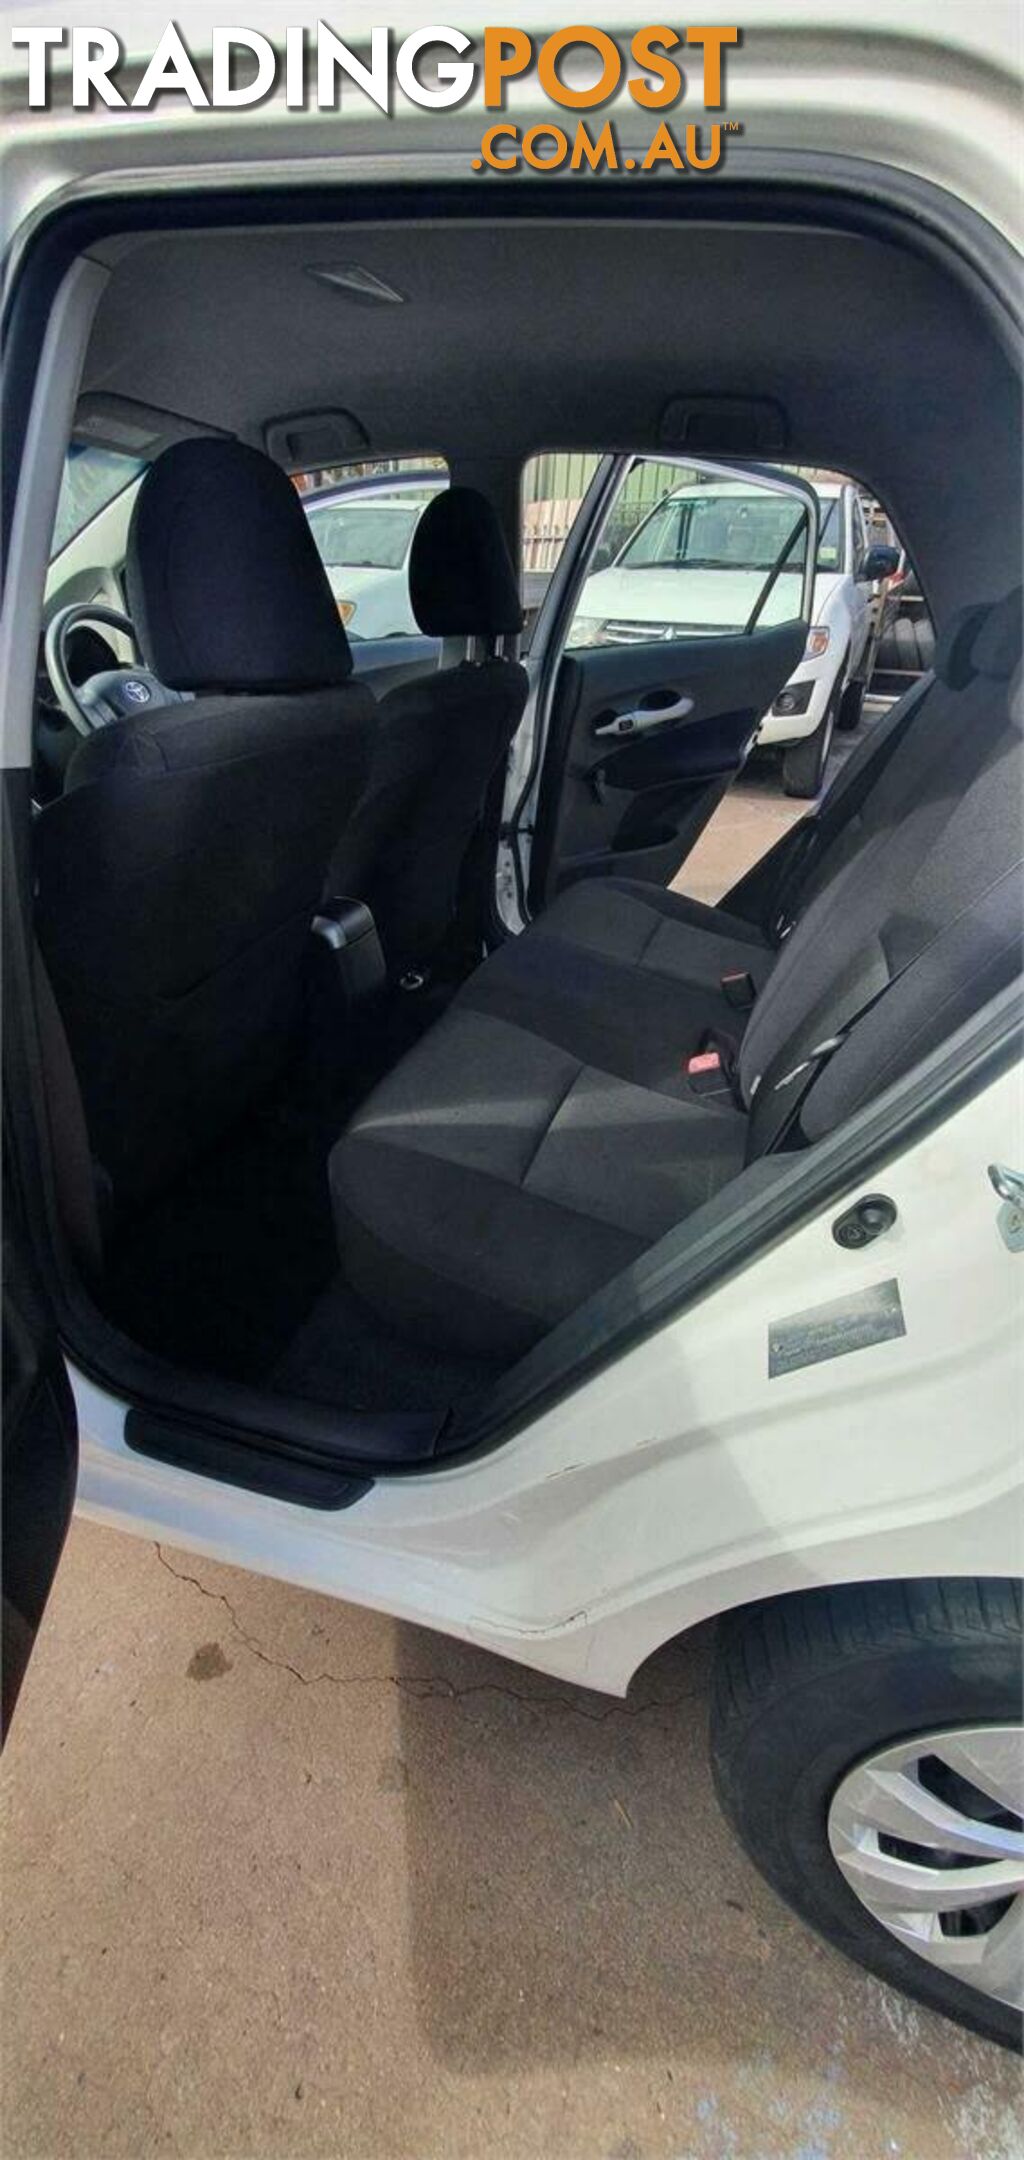 2008 TOYOTA COROLLA ASCENT ZRE152R HATCH